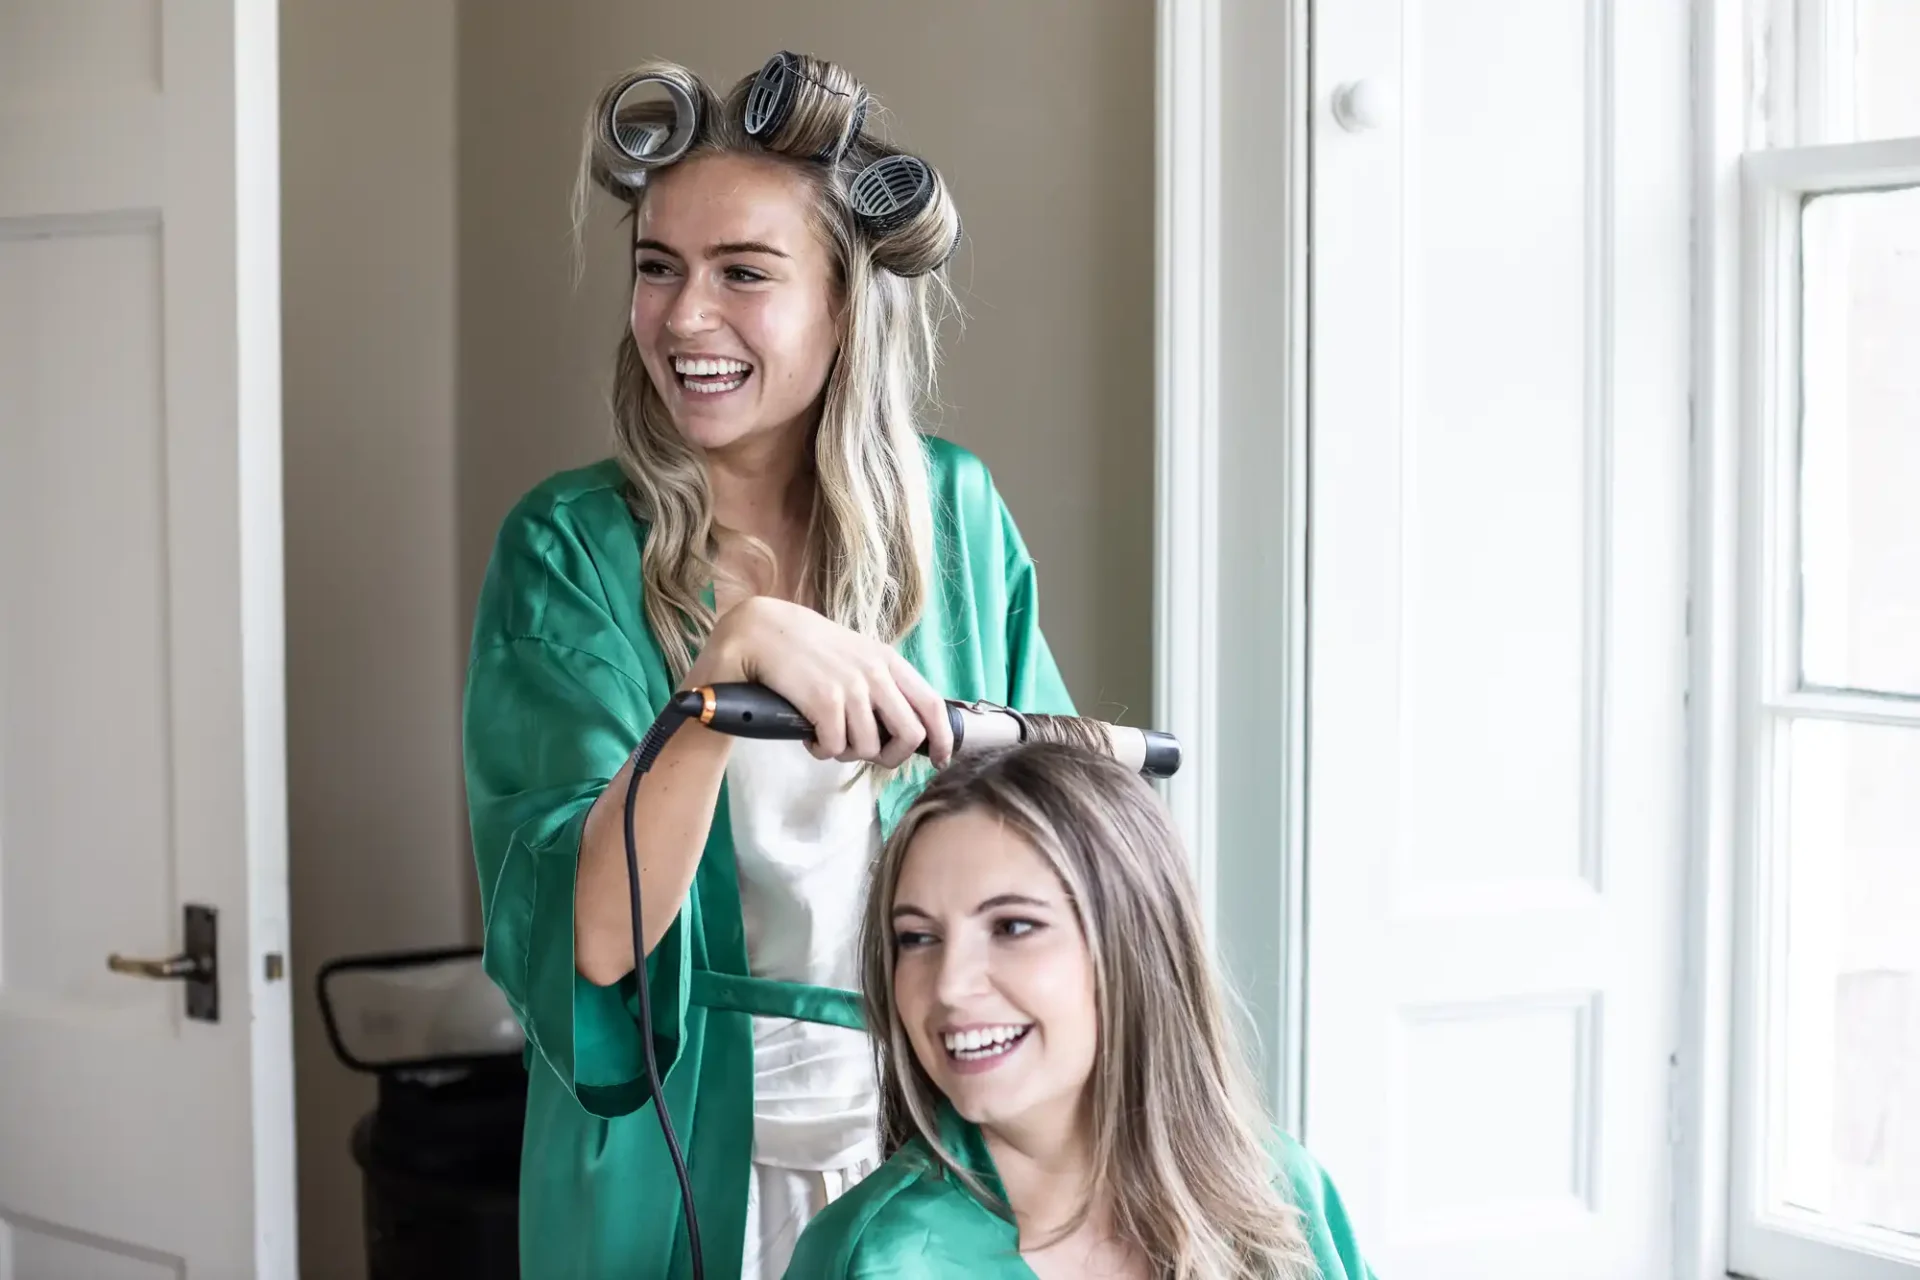 Two women smiling, one standing with hair curlers and holding a curling iron, and the other sitting with straight hair, both wearing green robes.